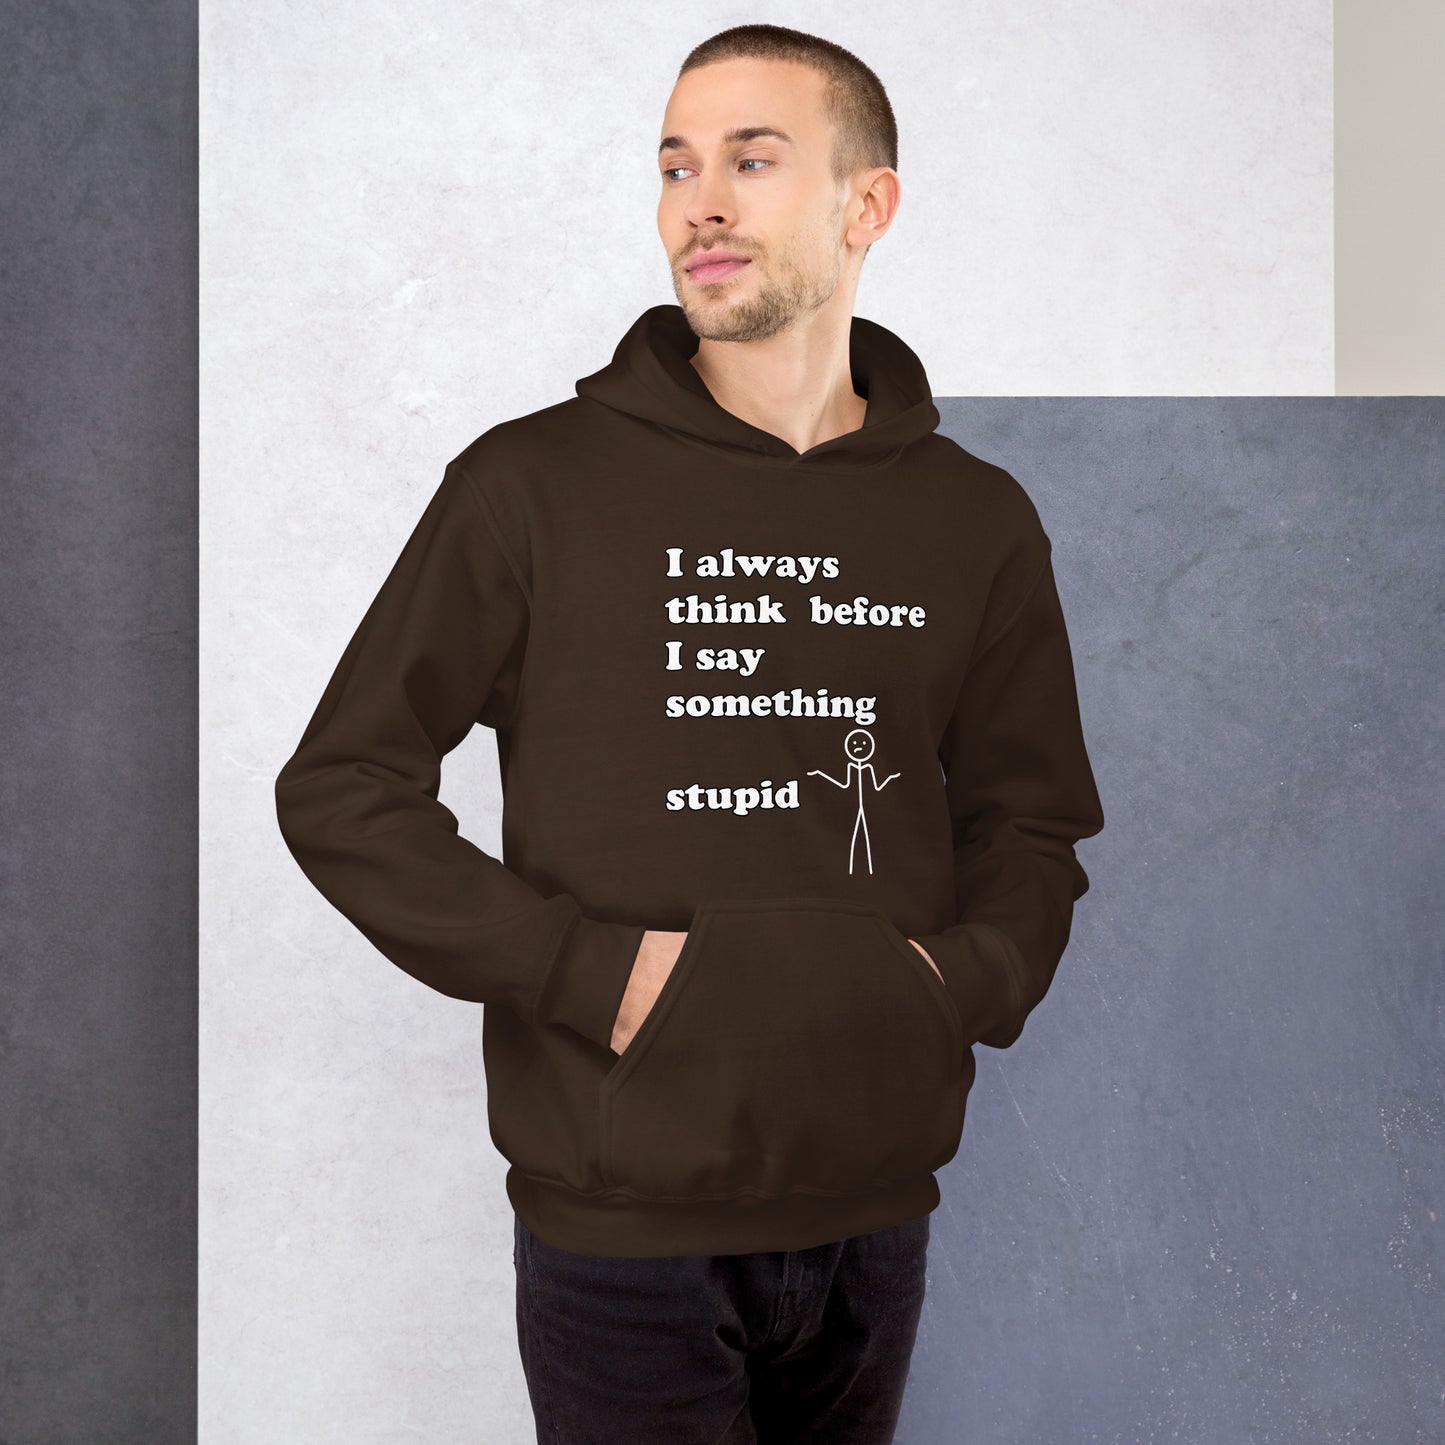 Man with brown hoodie with text "I always think before I say something stupid"